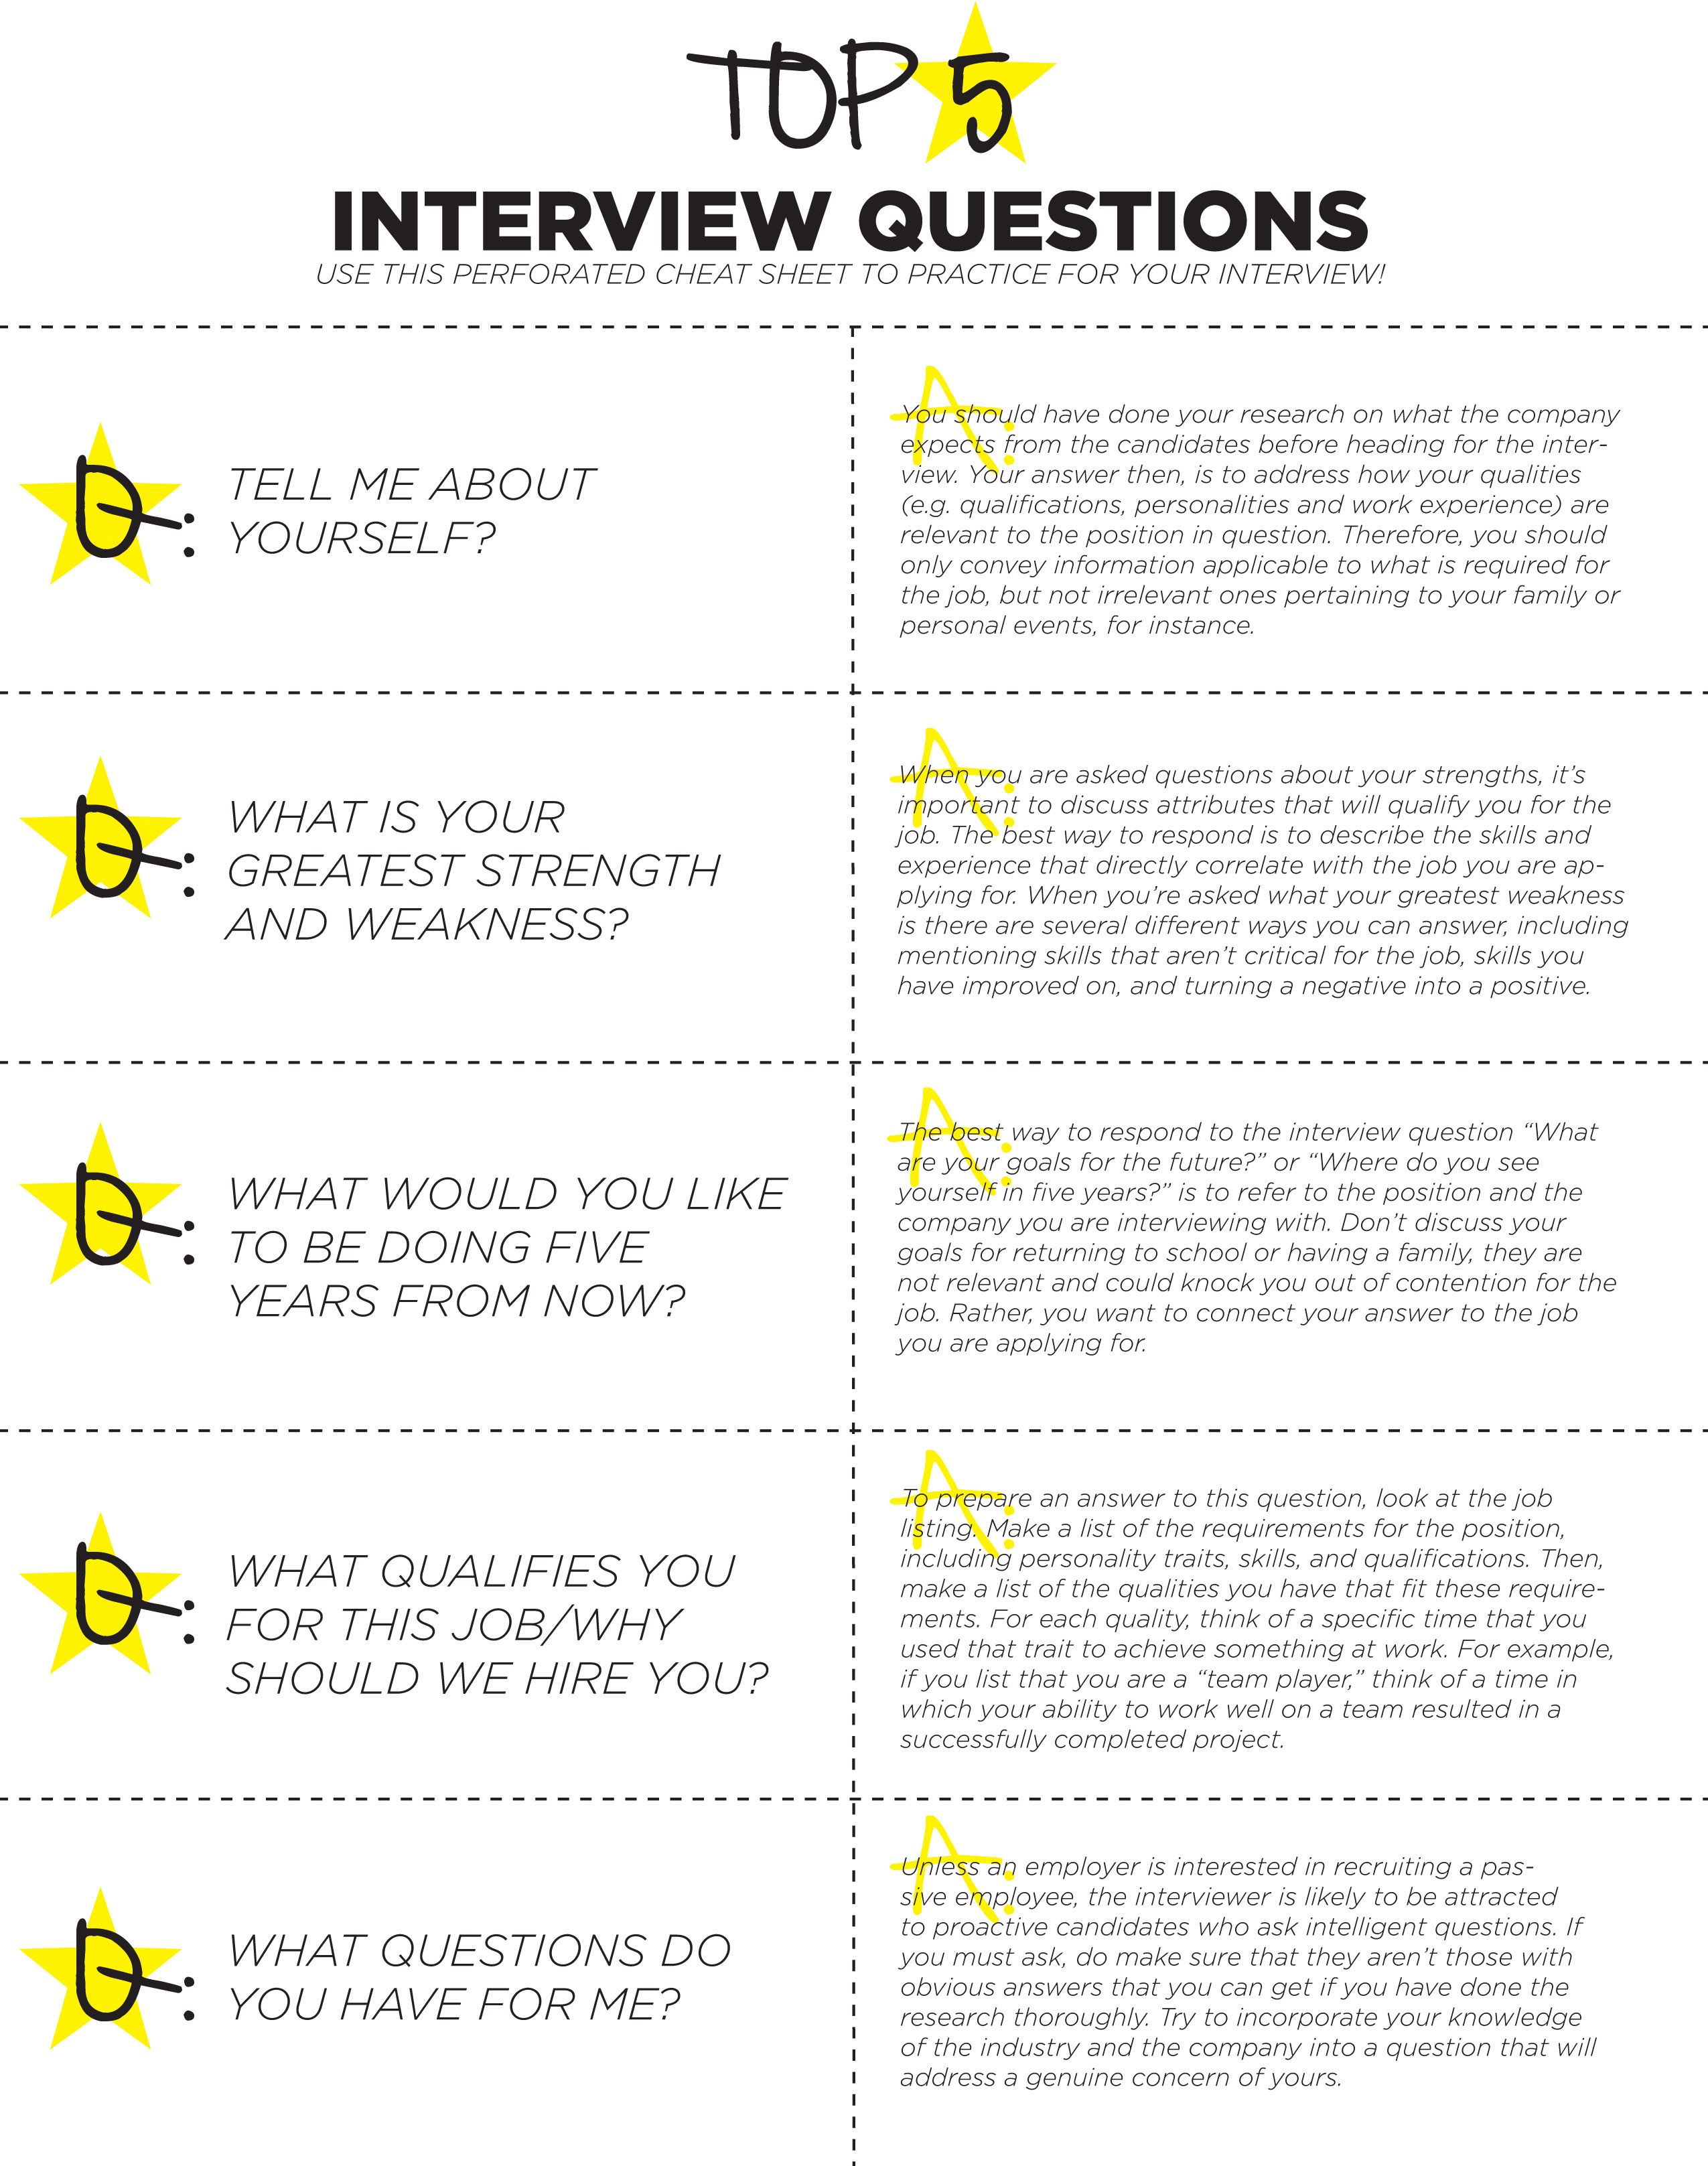 Have an interview coming up? Practice makes perfect! Print out this